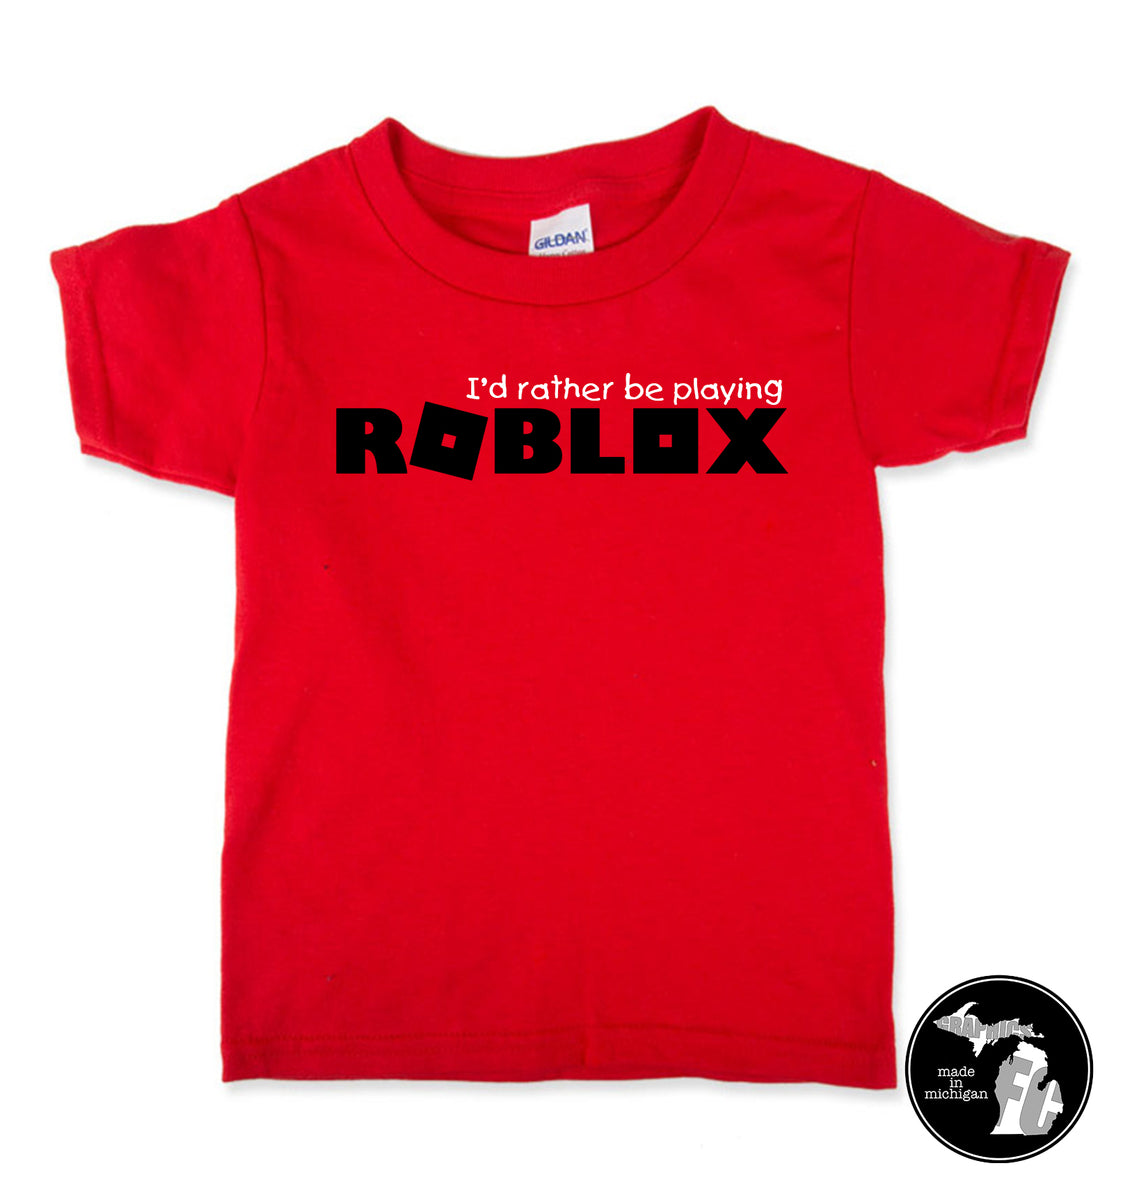 Create your own SHIRT! - Roblox